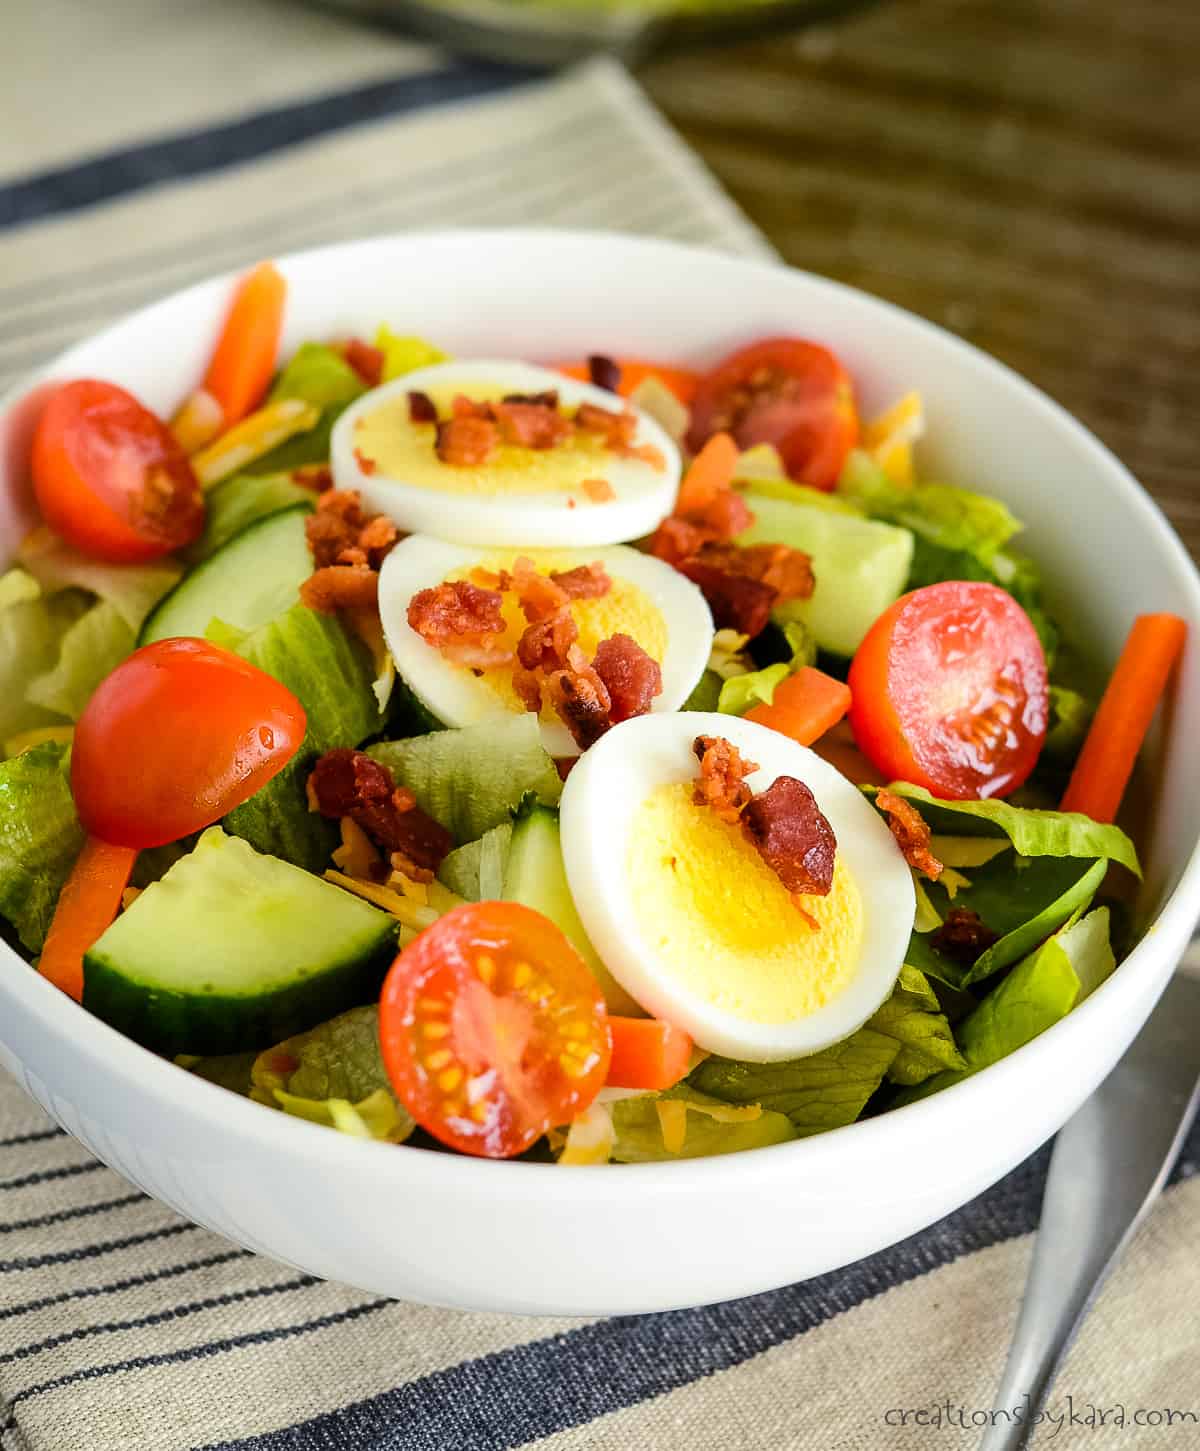 bowl of greens, vegetables, eggs, and bacon